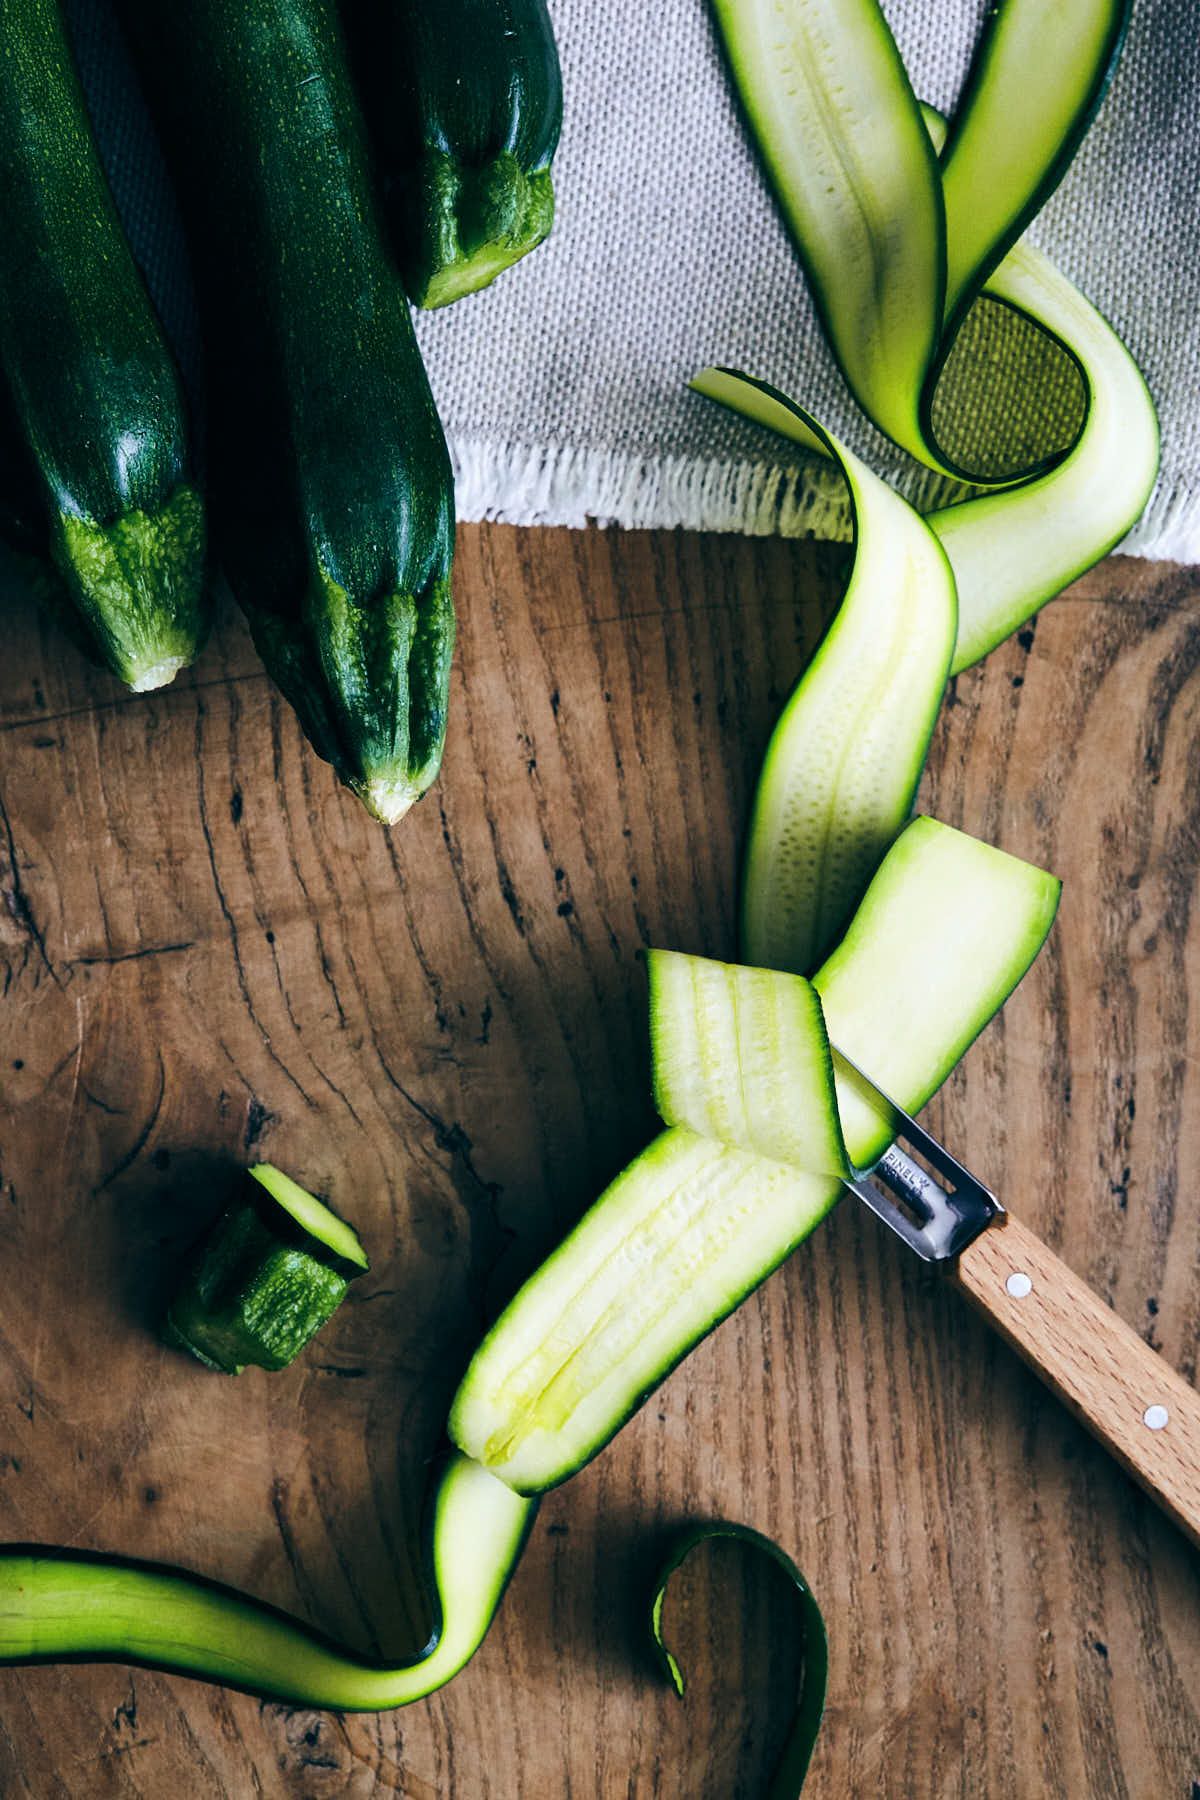 Cutting zucchini into pappardelle style "noodles"